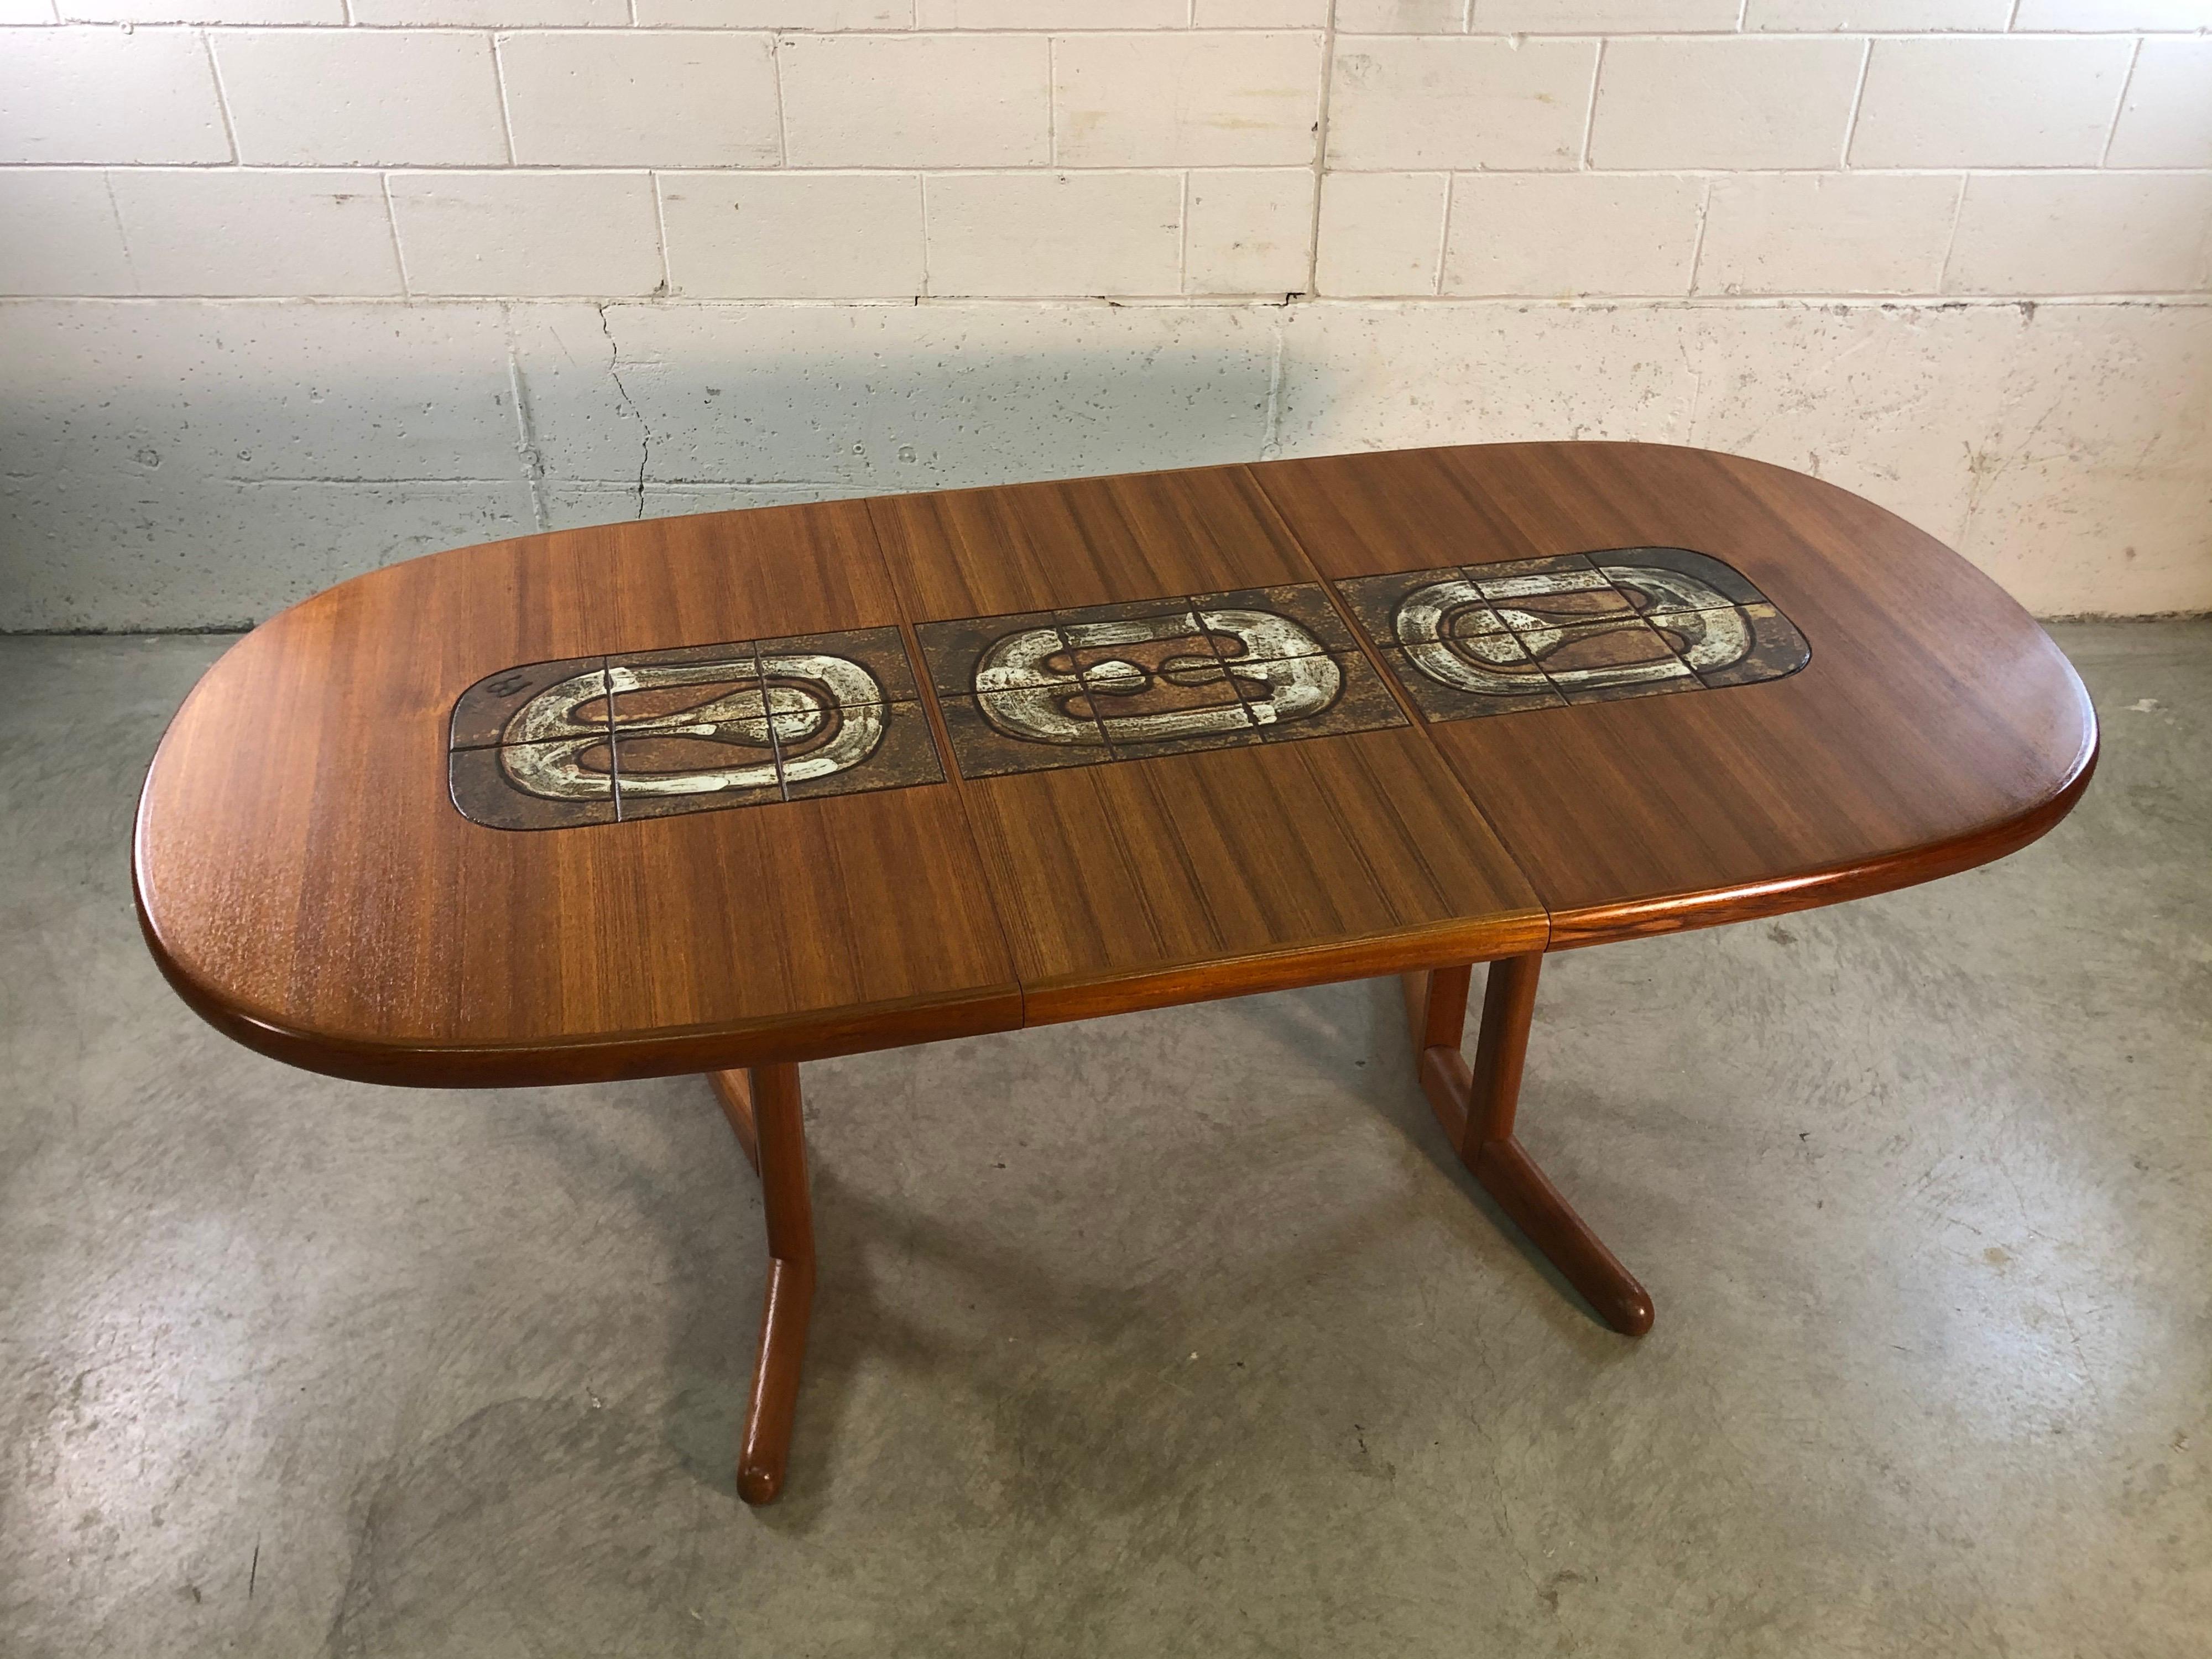 Vintage Danish modern oval teak dining table with tile top designed by AM Mobler. The tabletop tile is also included in the extra board. Table fully open is 78” W. Board is 19” W. Marked underneath.